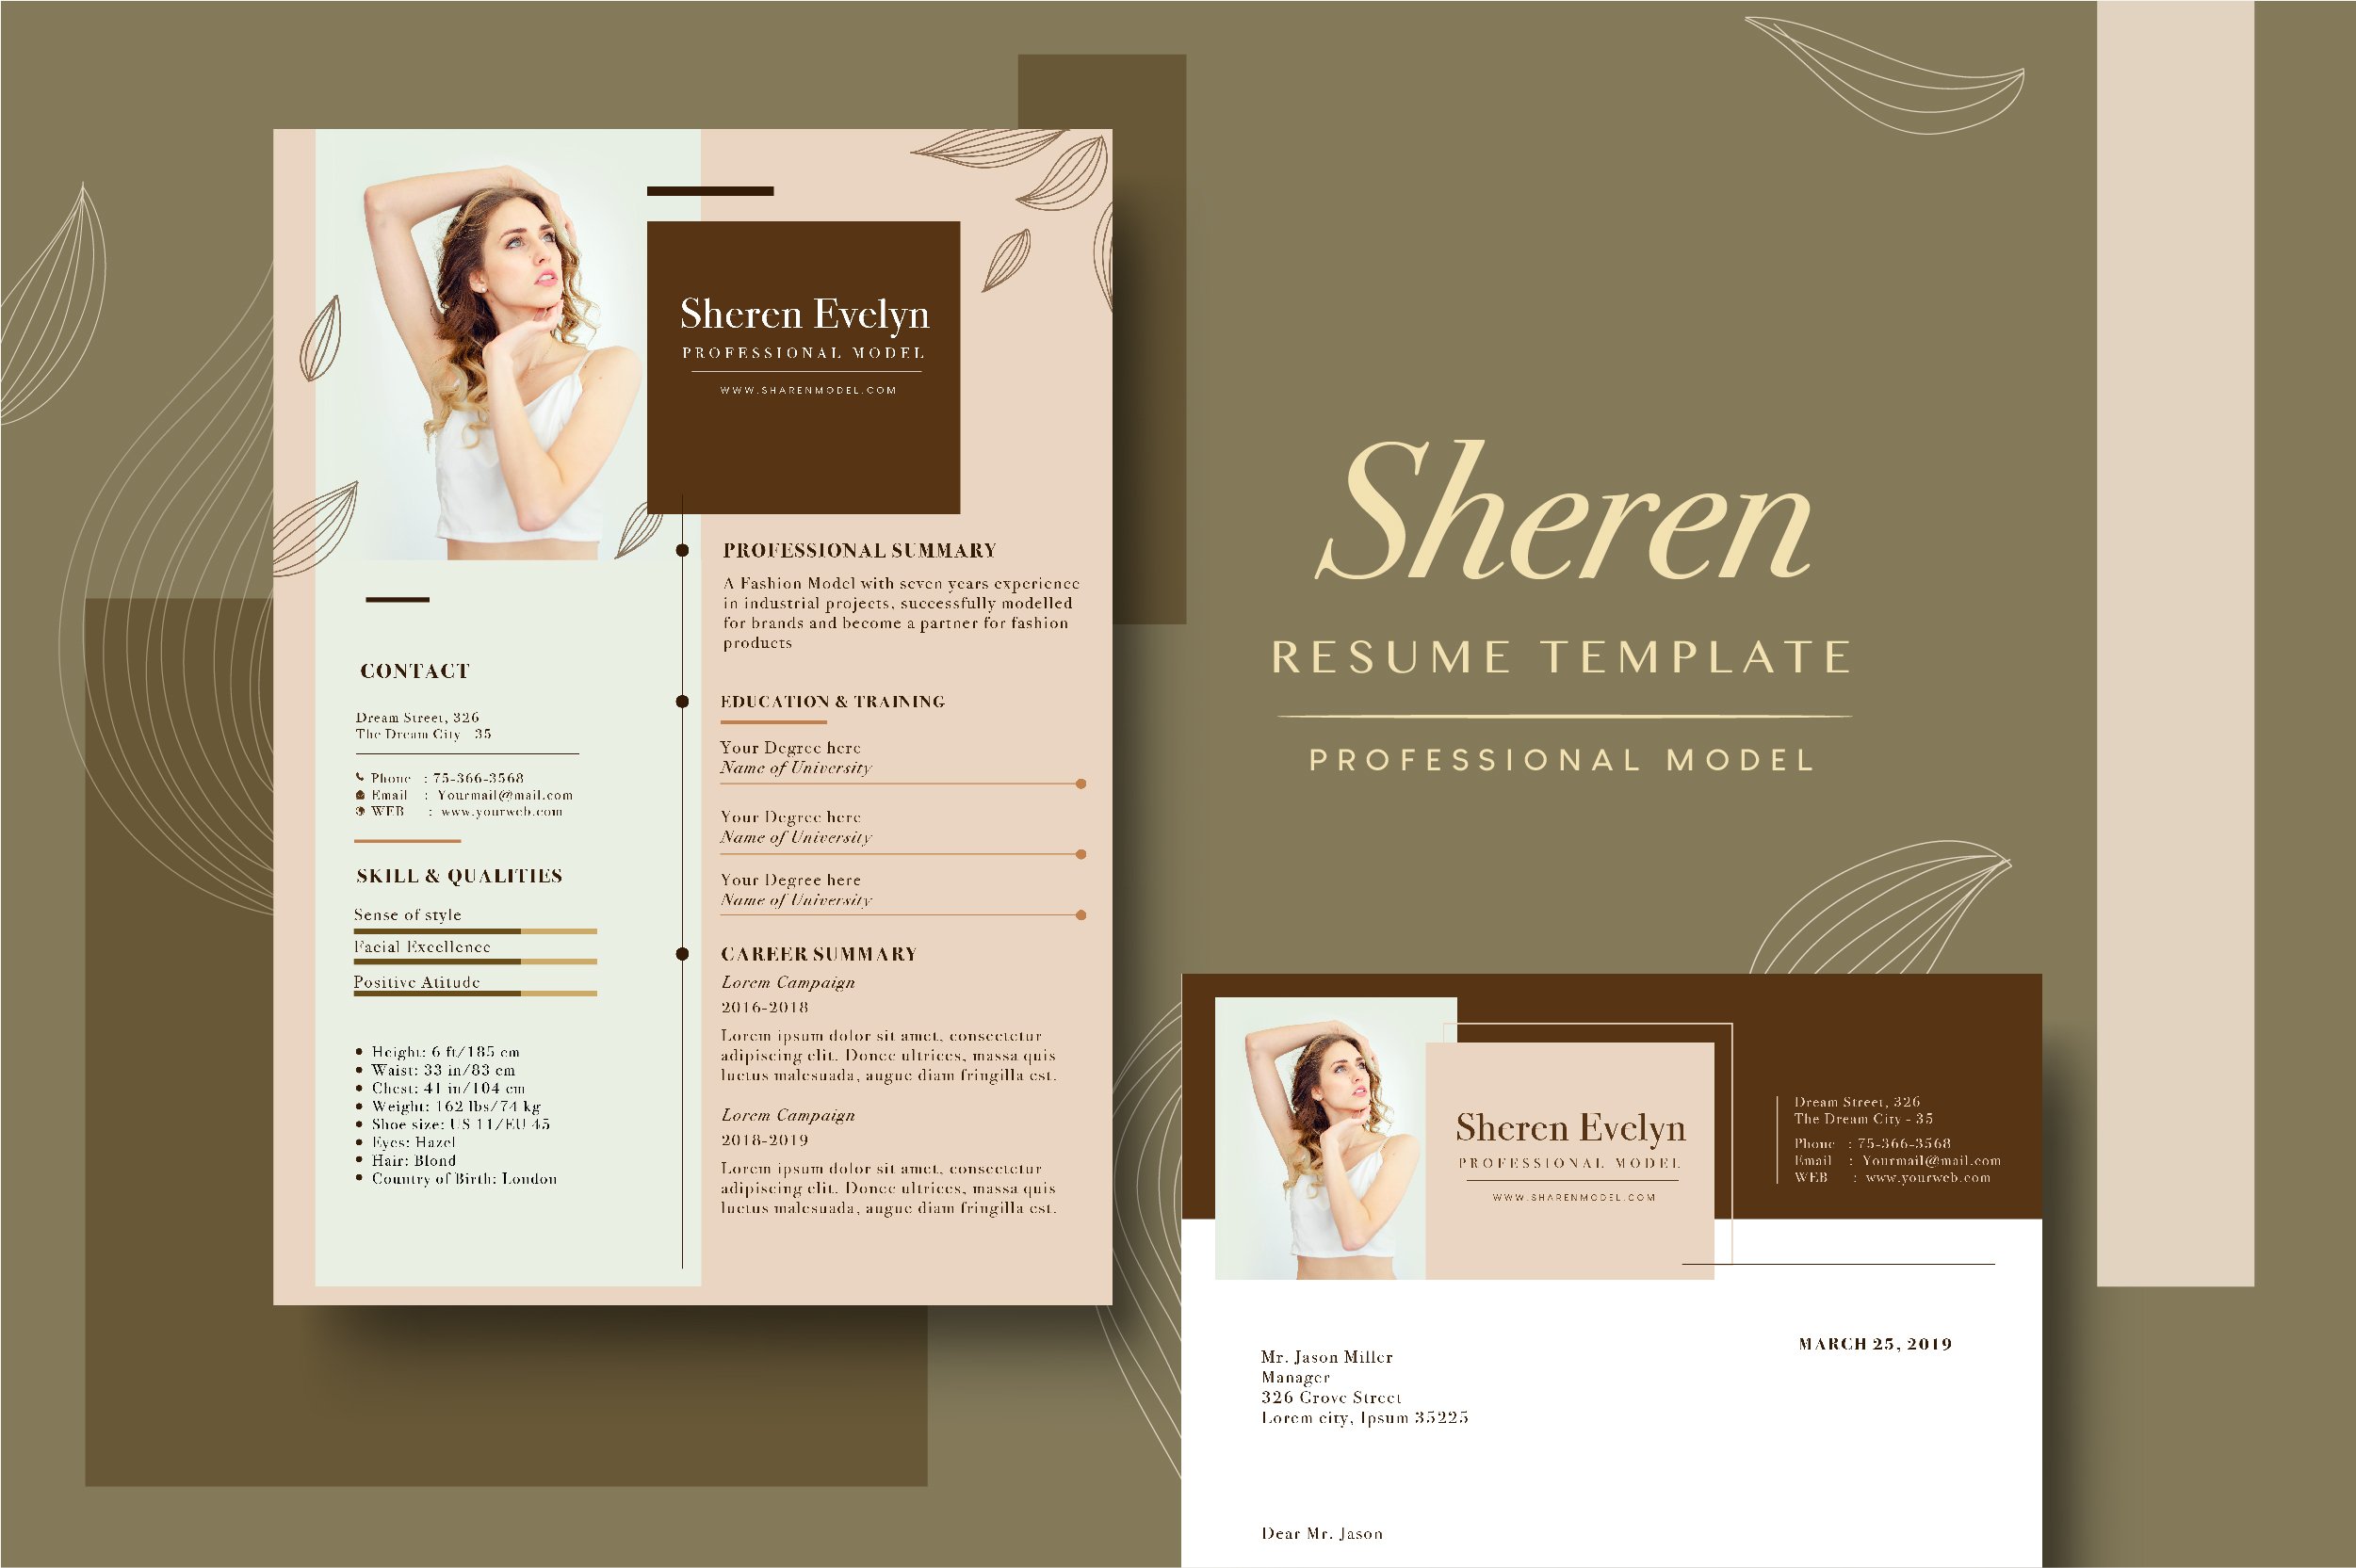 Resume Template - "Sheren" cover image.